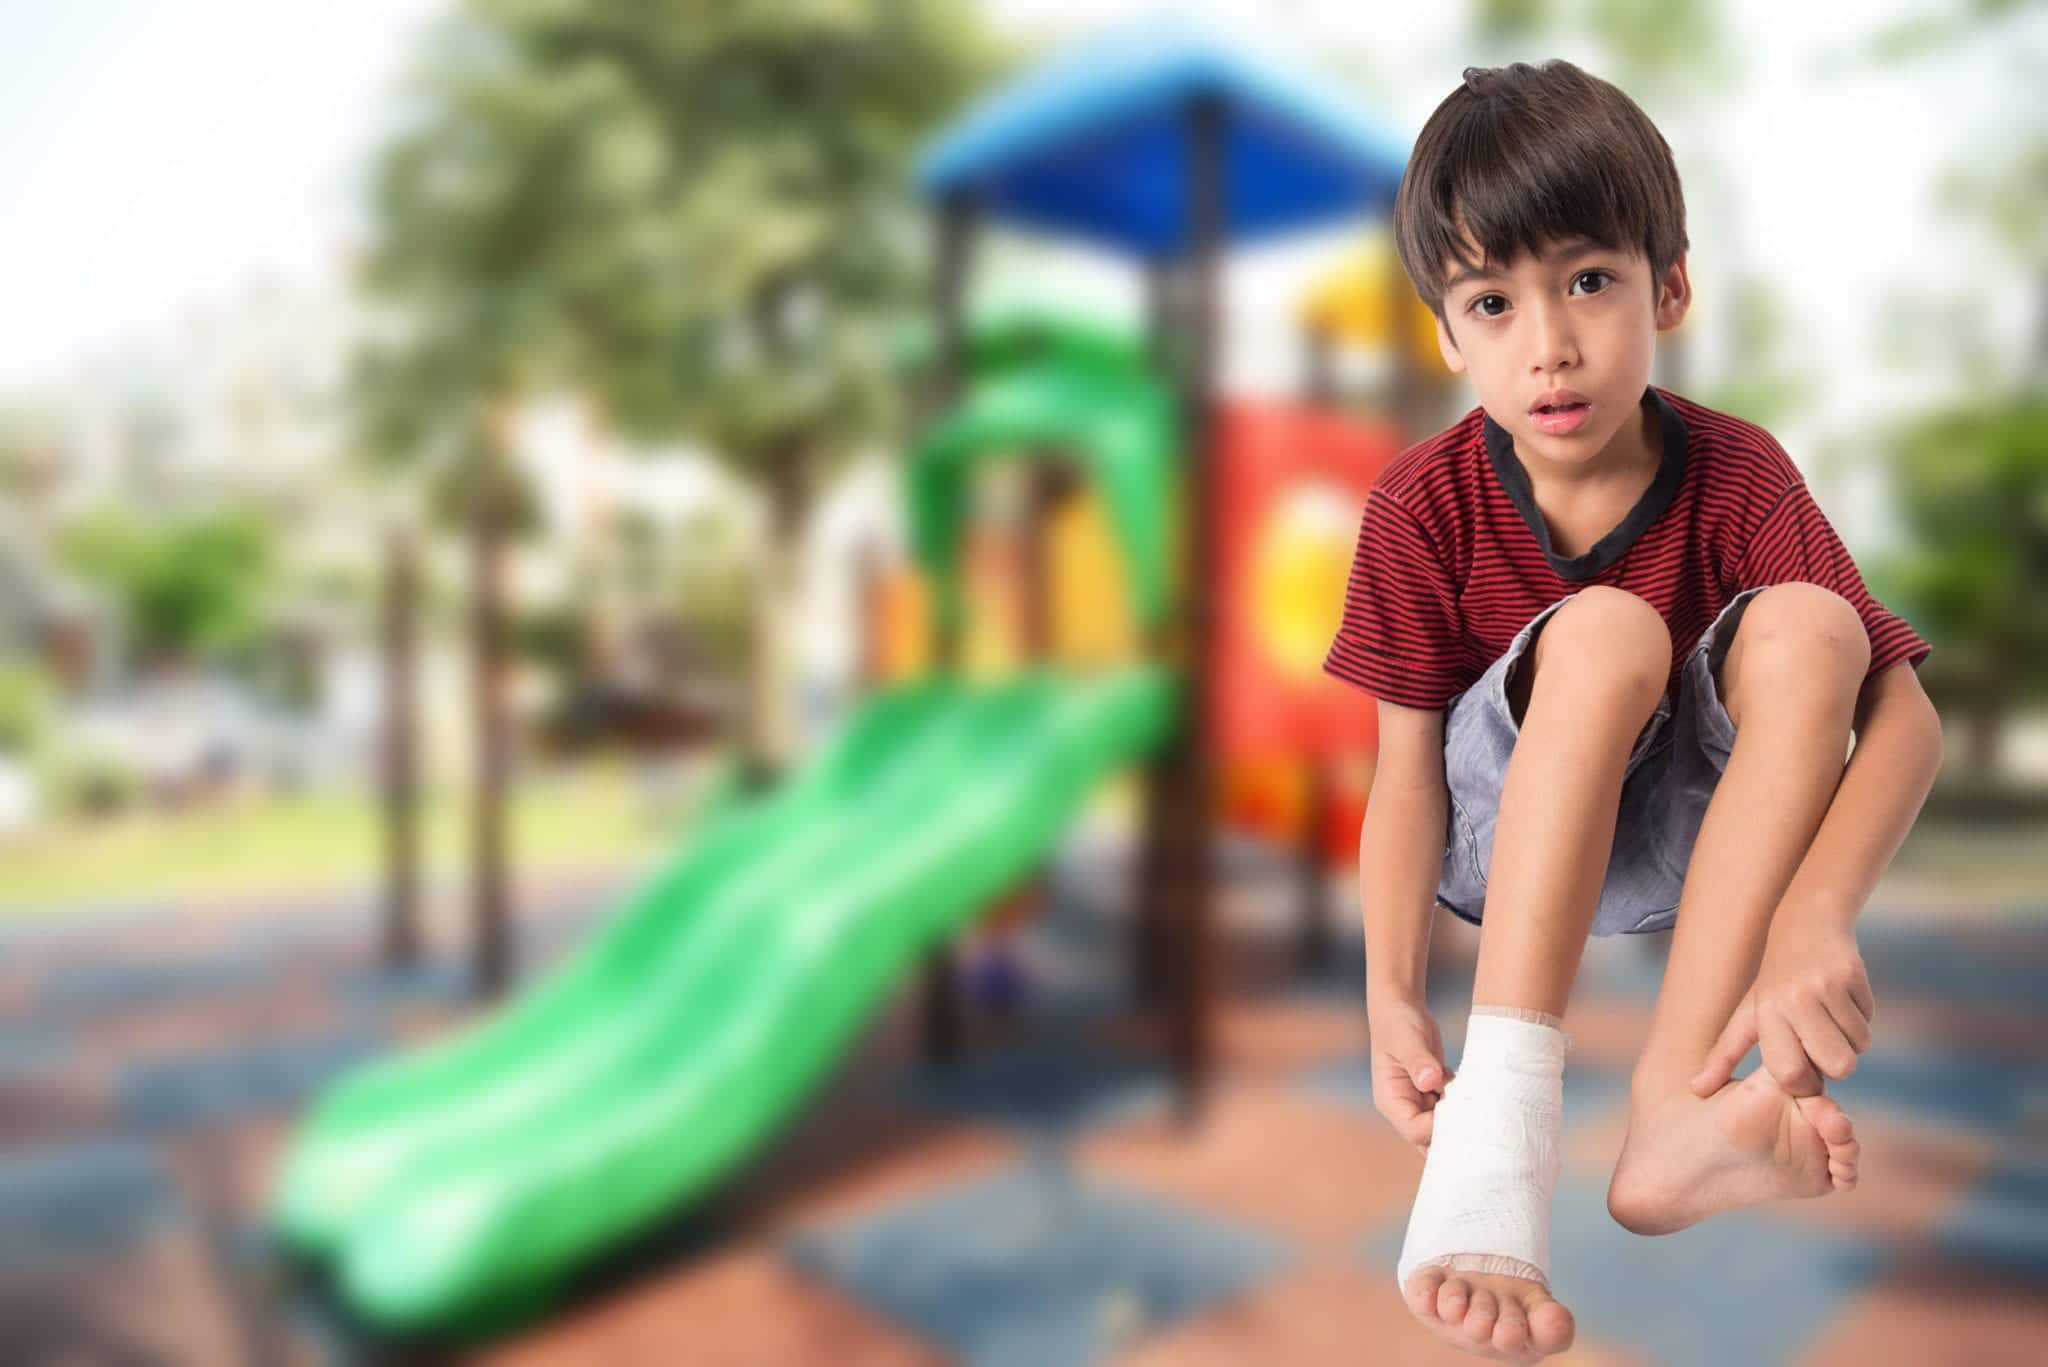 Playground Injuries and Accidents